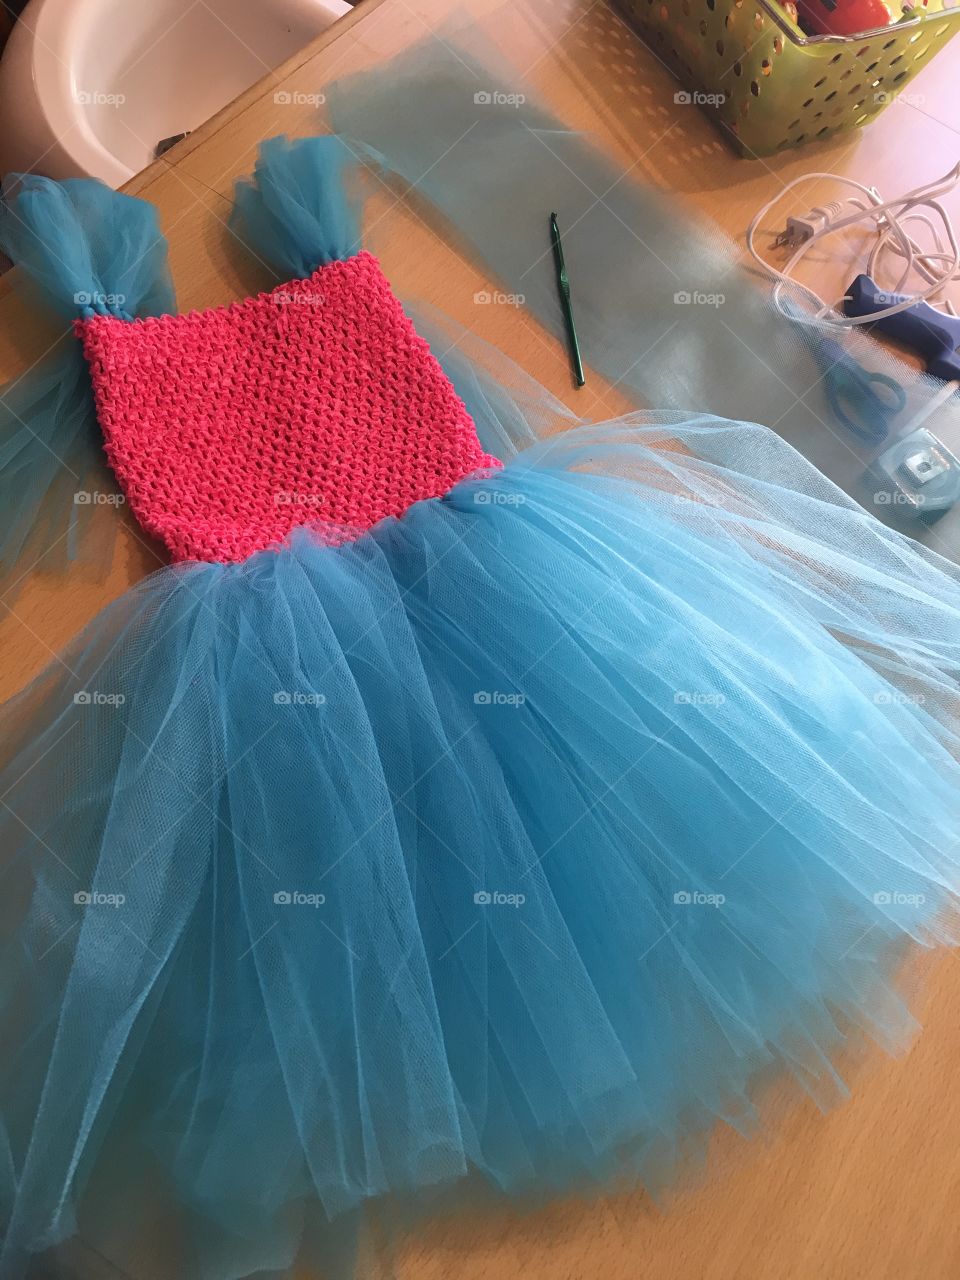 Making a tulle dress